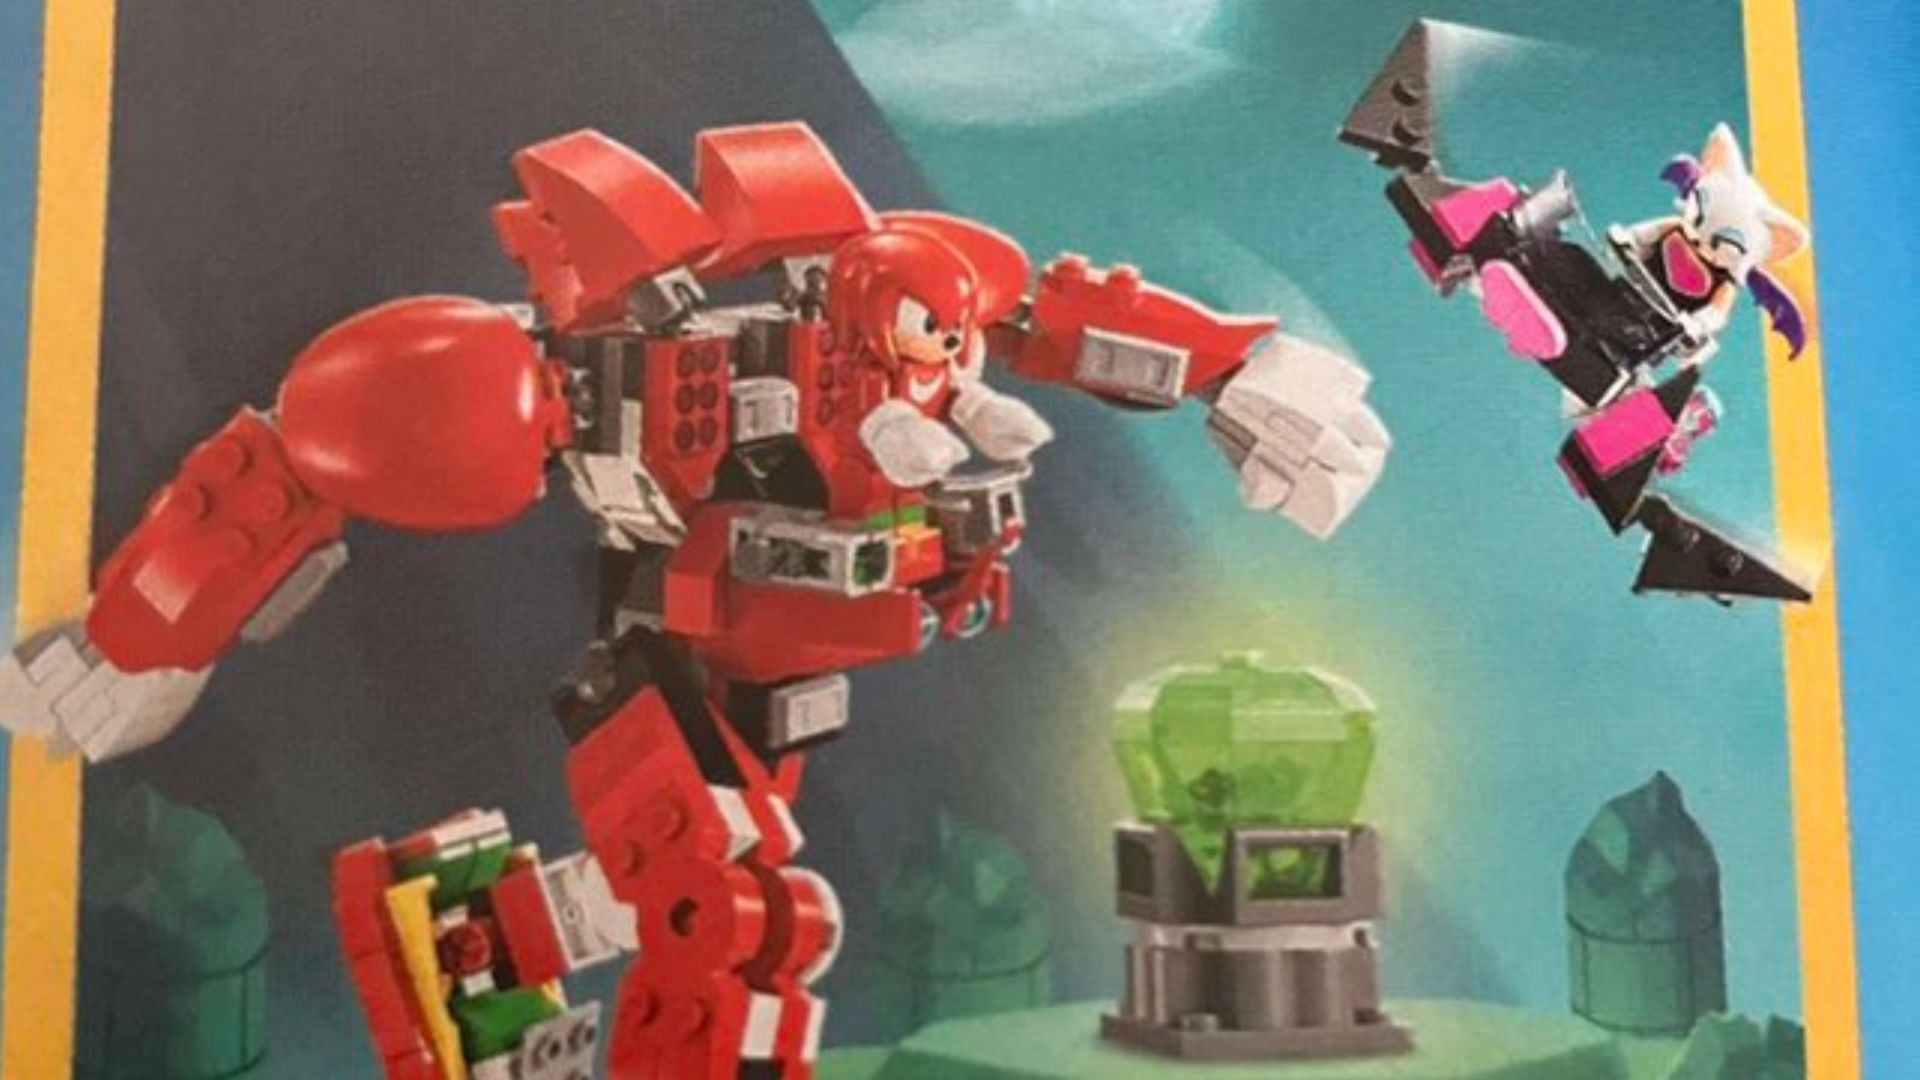 Lego Knuckles, Shadow and Rouge teased for Sonic the Hedgehog sets